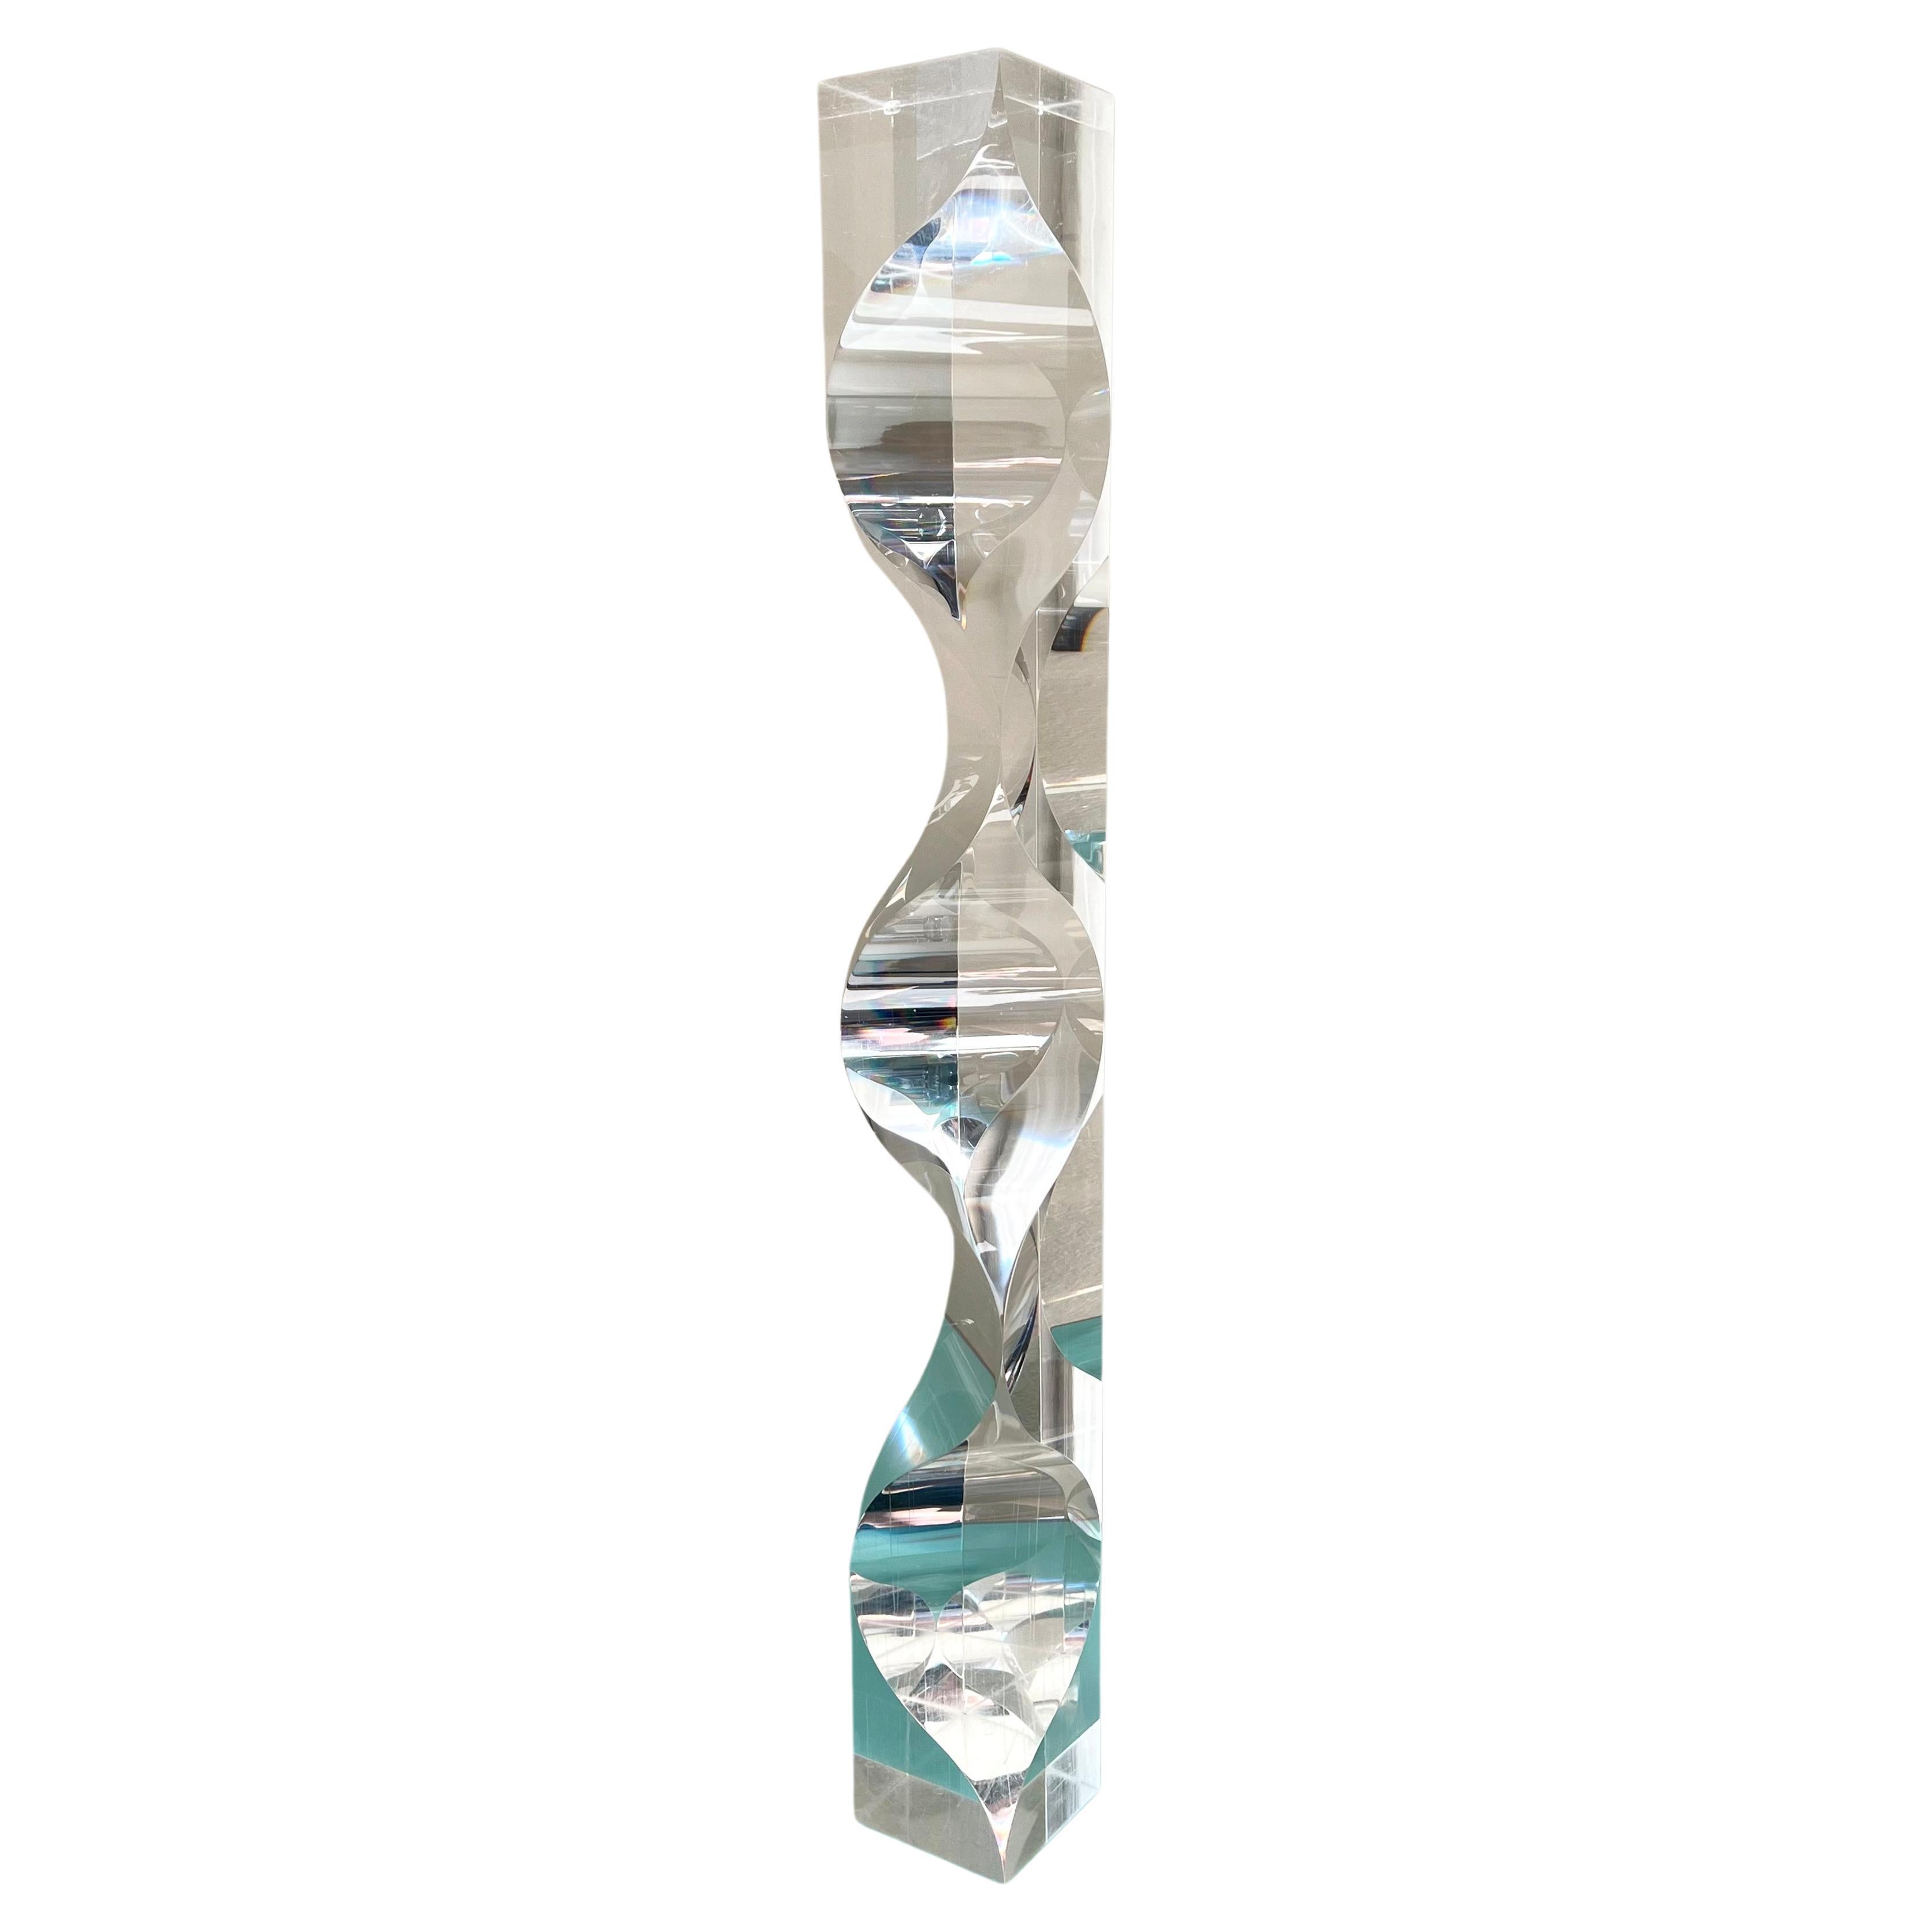 Alessio Tasca for Fusina Acrylic Lucite Prism Tower Sculpture For Sale